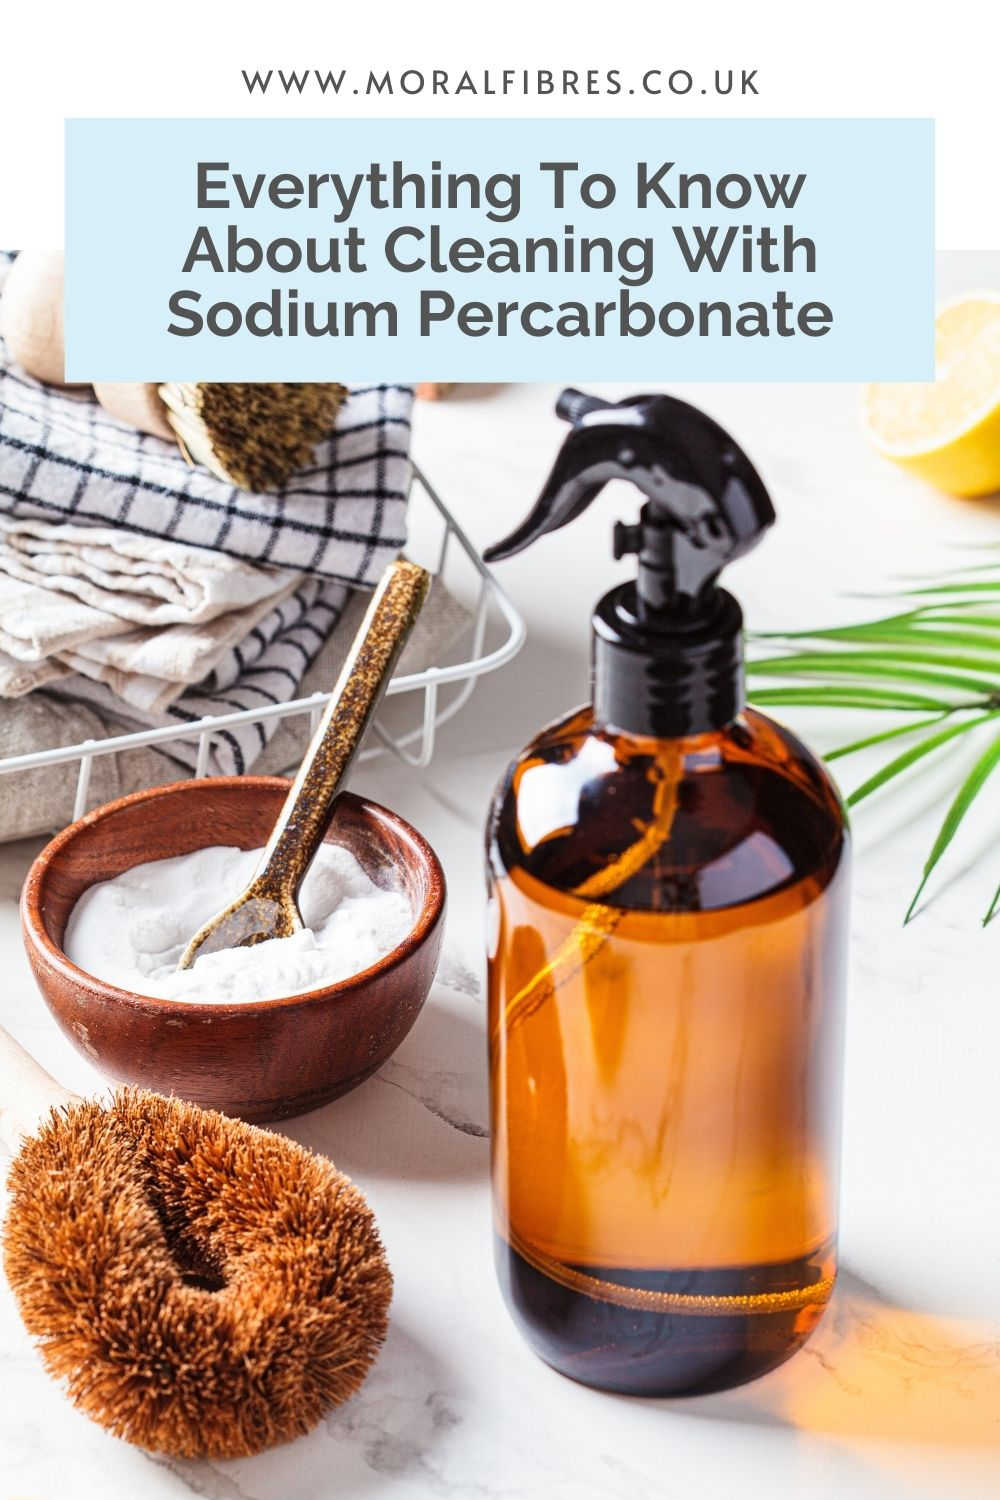 Cleaning With Sodium Percarbonate - Everything To Know - Moral Fibres